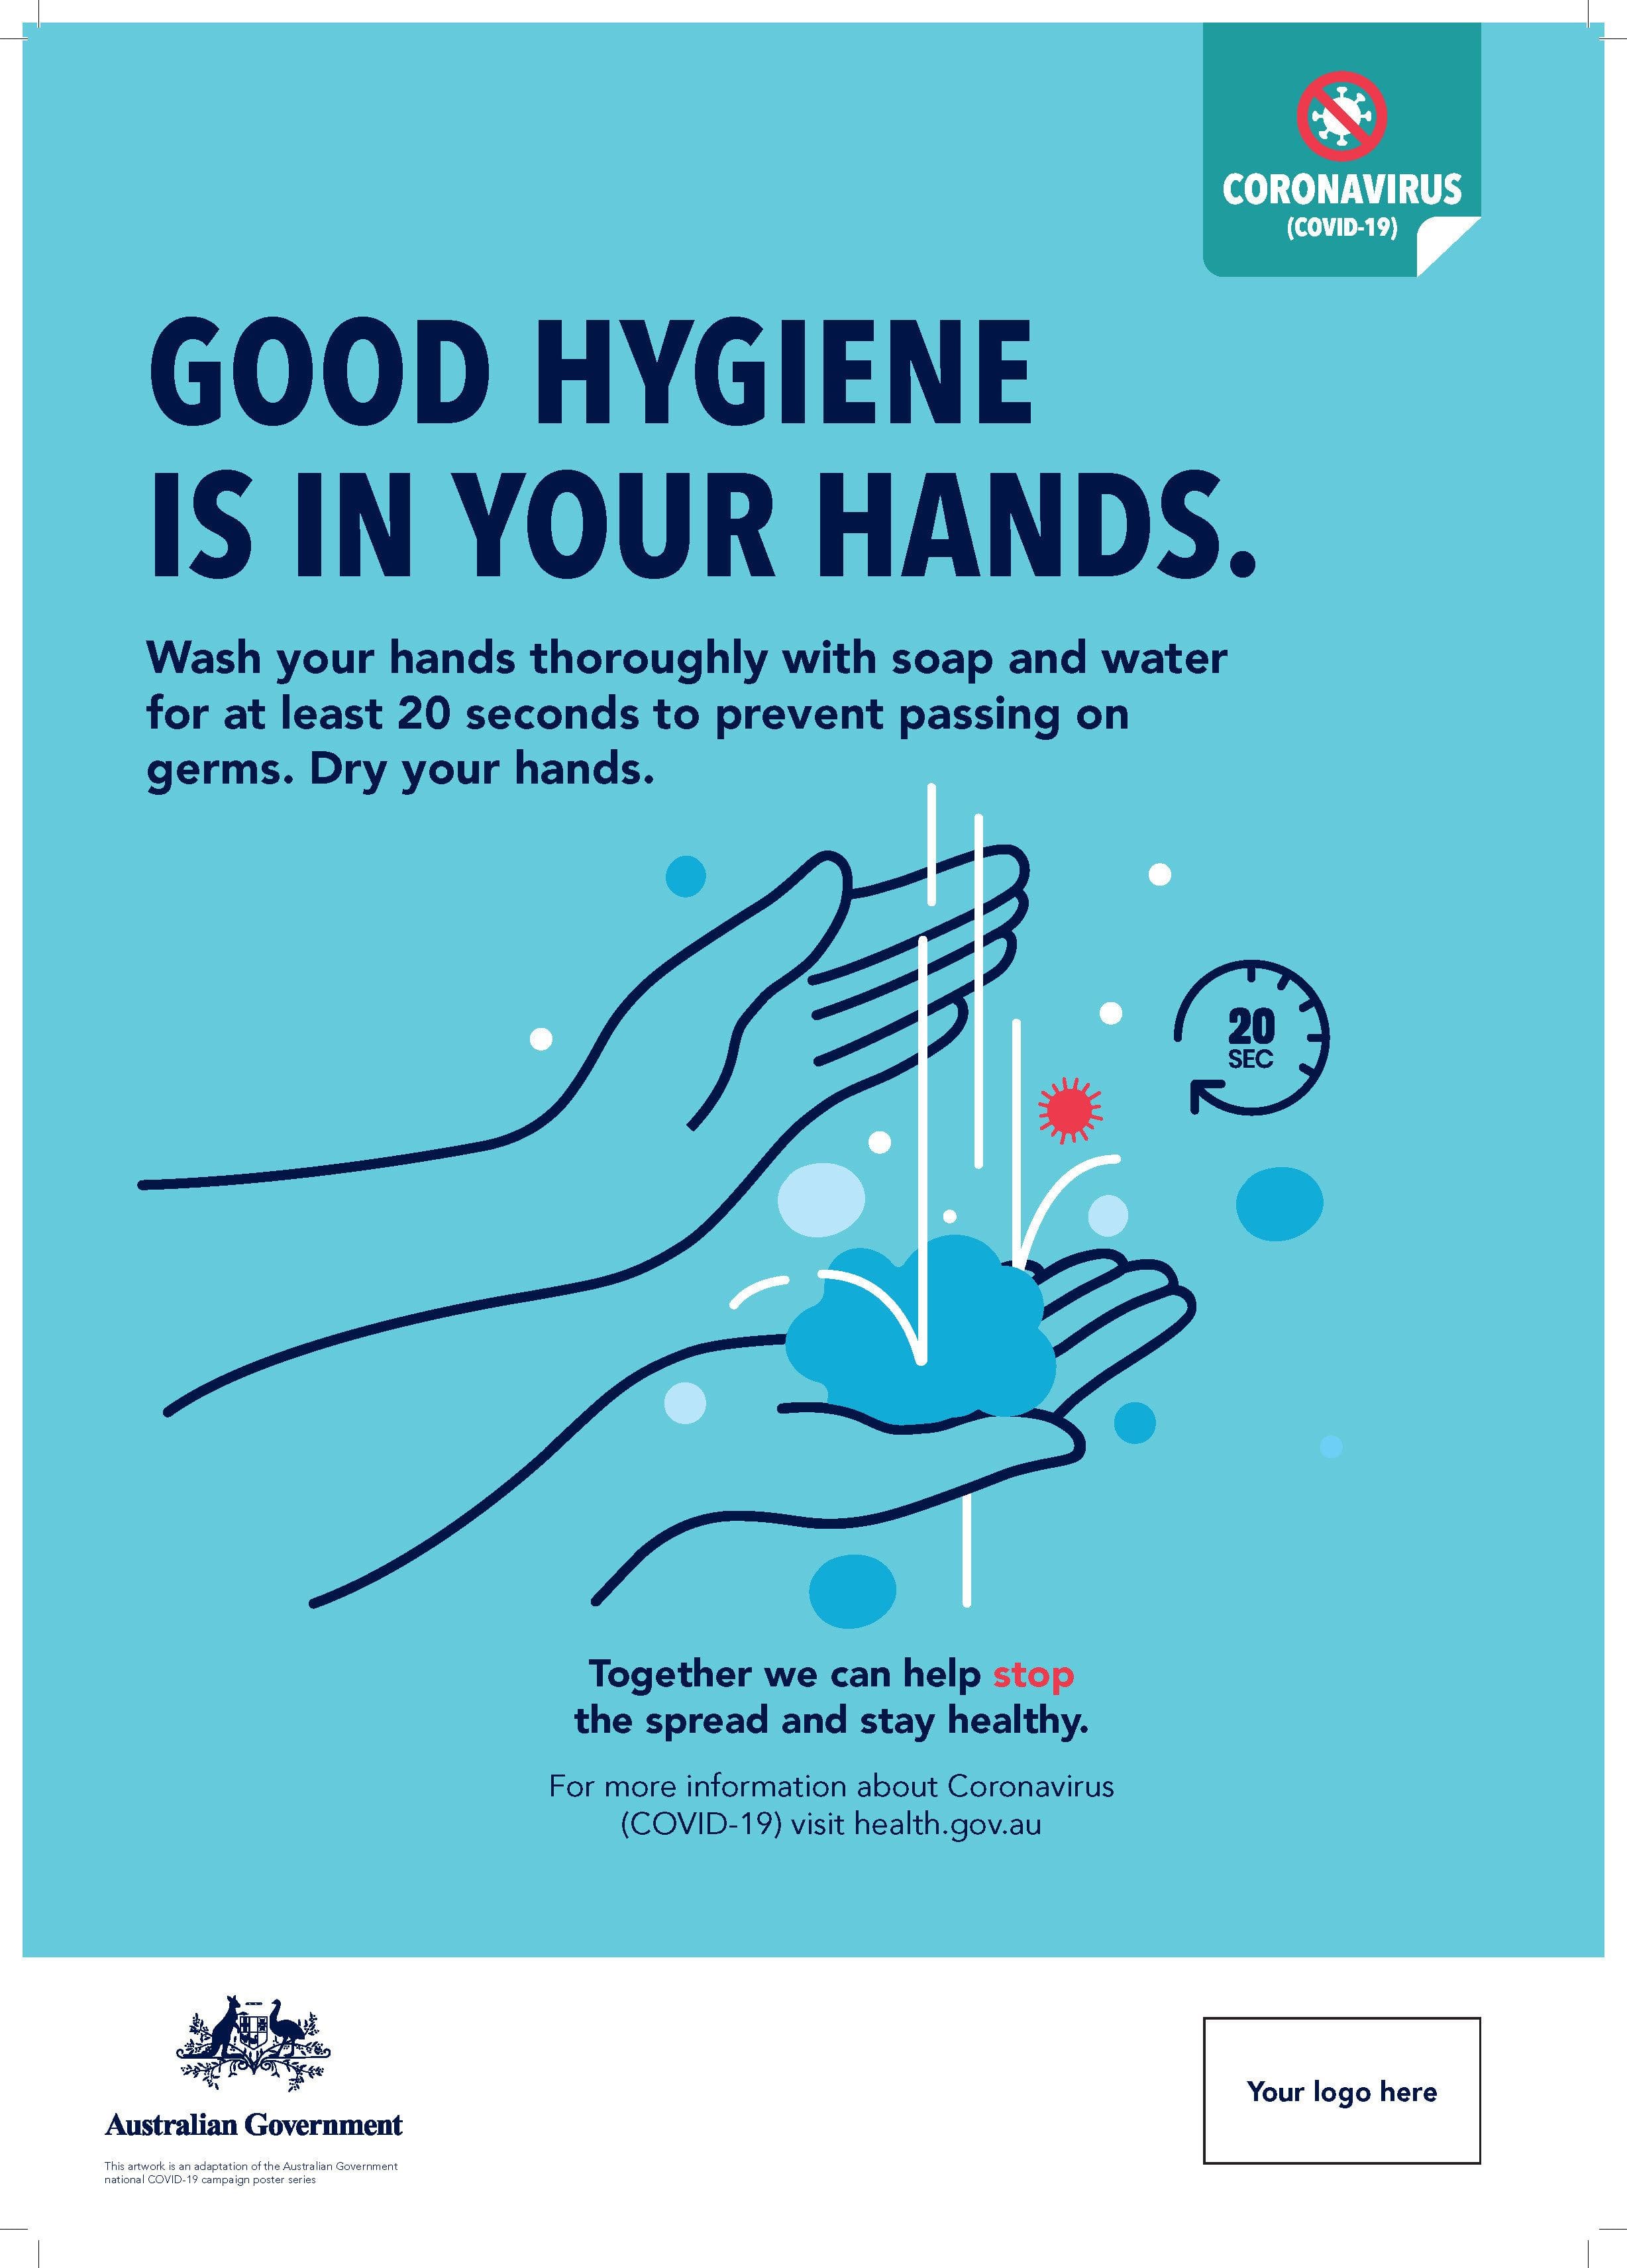 #1: 'Hygiene in Your Hands'